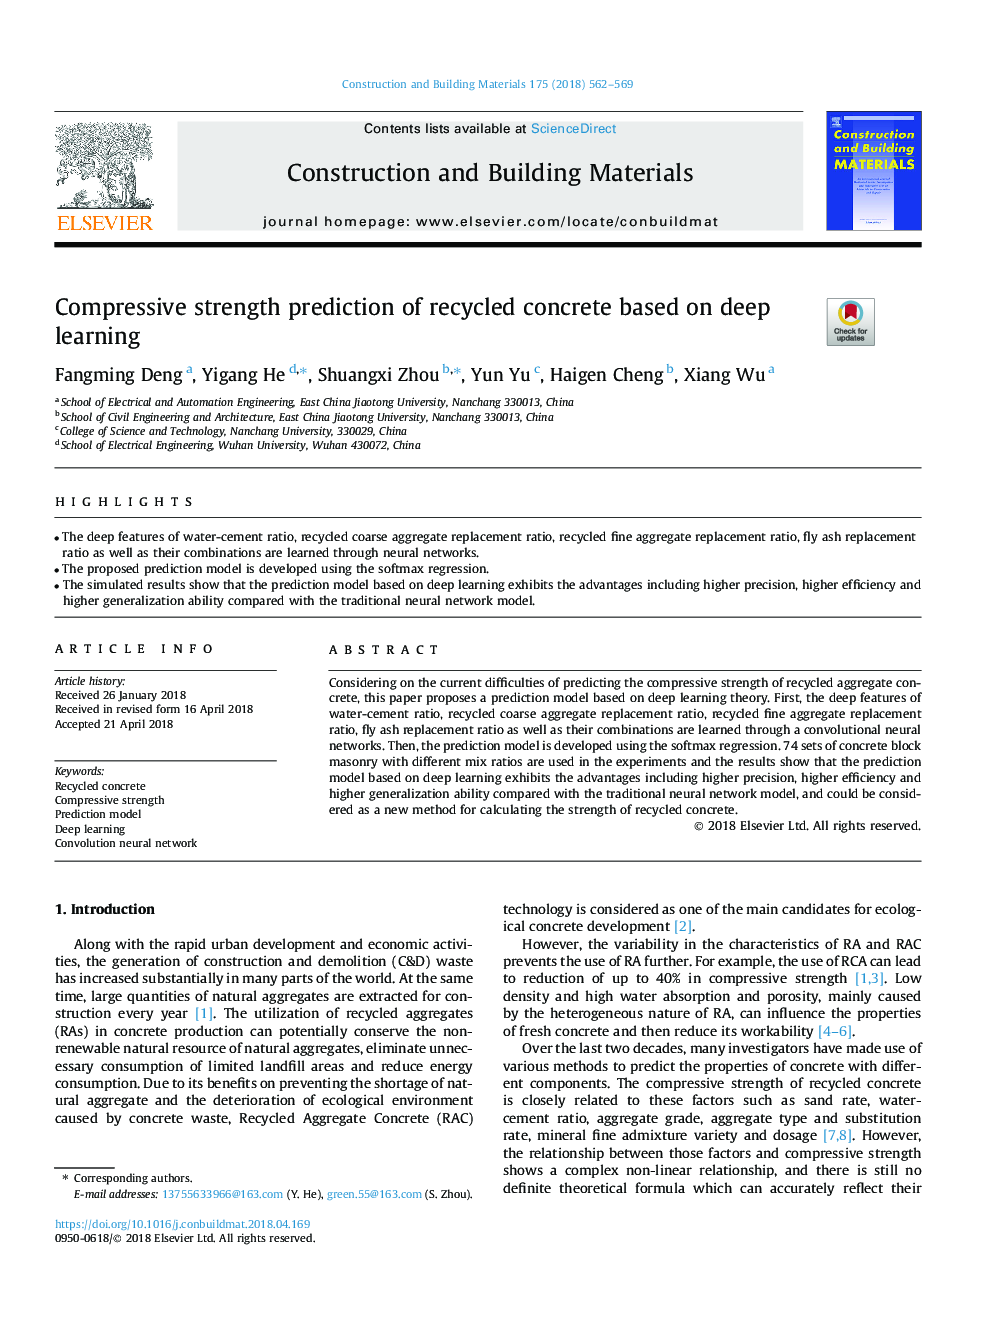 Compressive strength prediction of recycled concrete based on deep learning